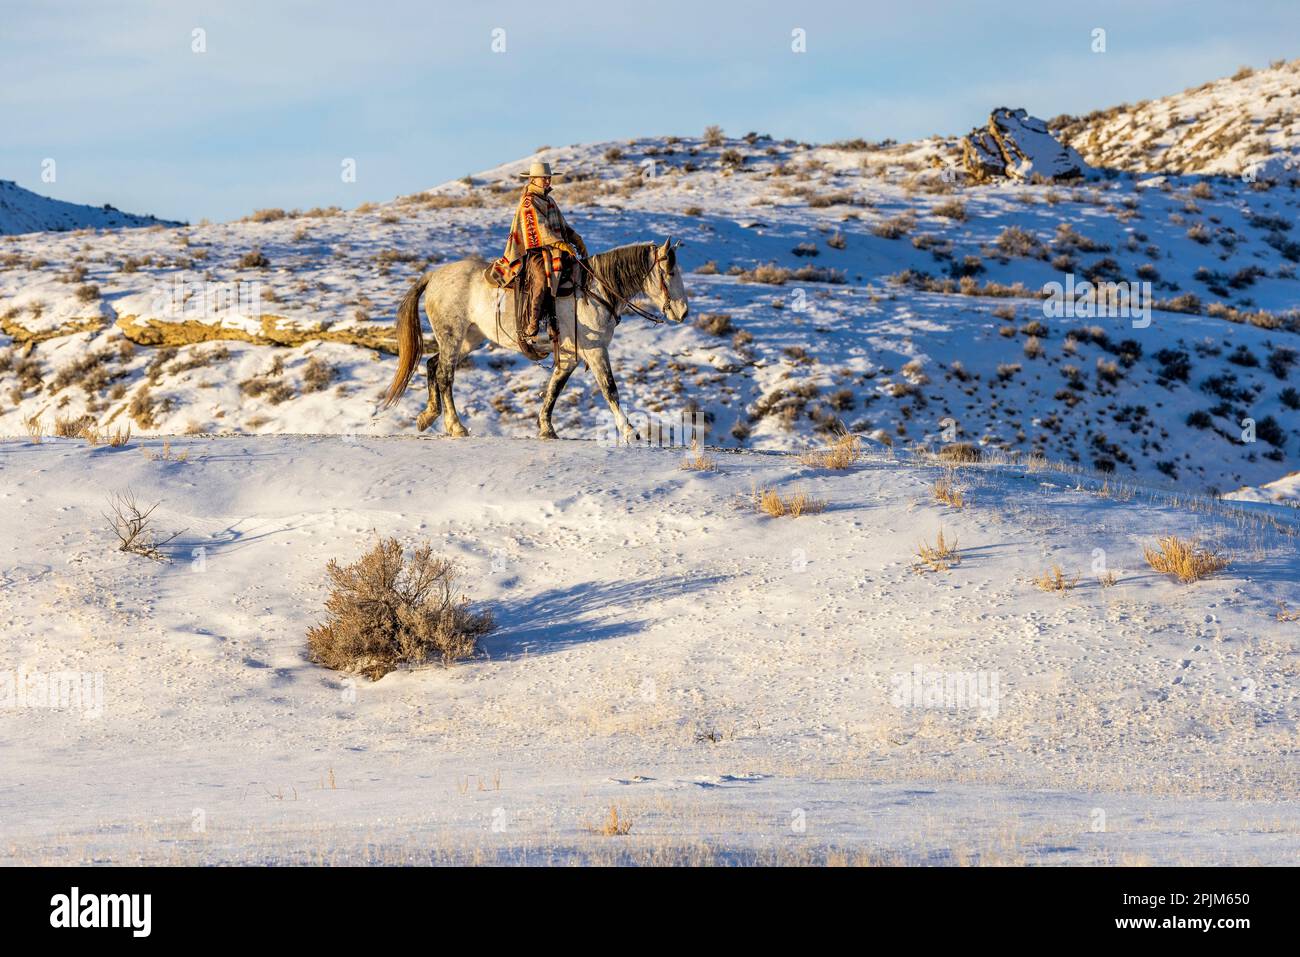 USA, Wyoming. Hideout Horse Ranch, wrangler and horse in snow. (MR,PR) Stock Photo